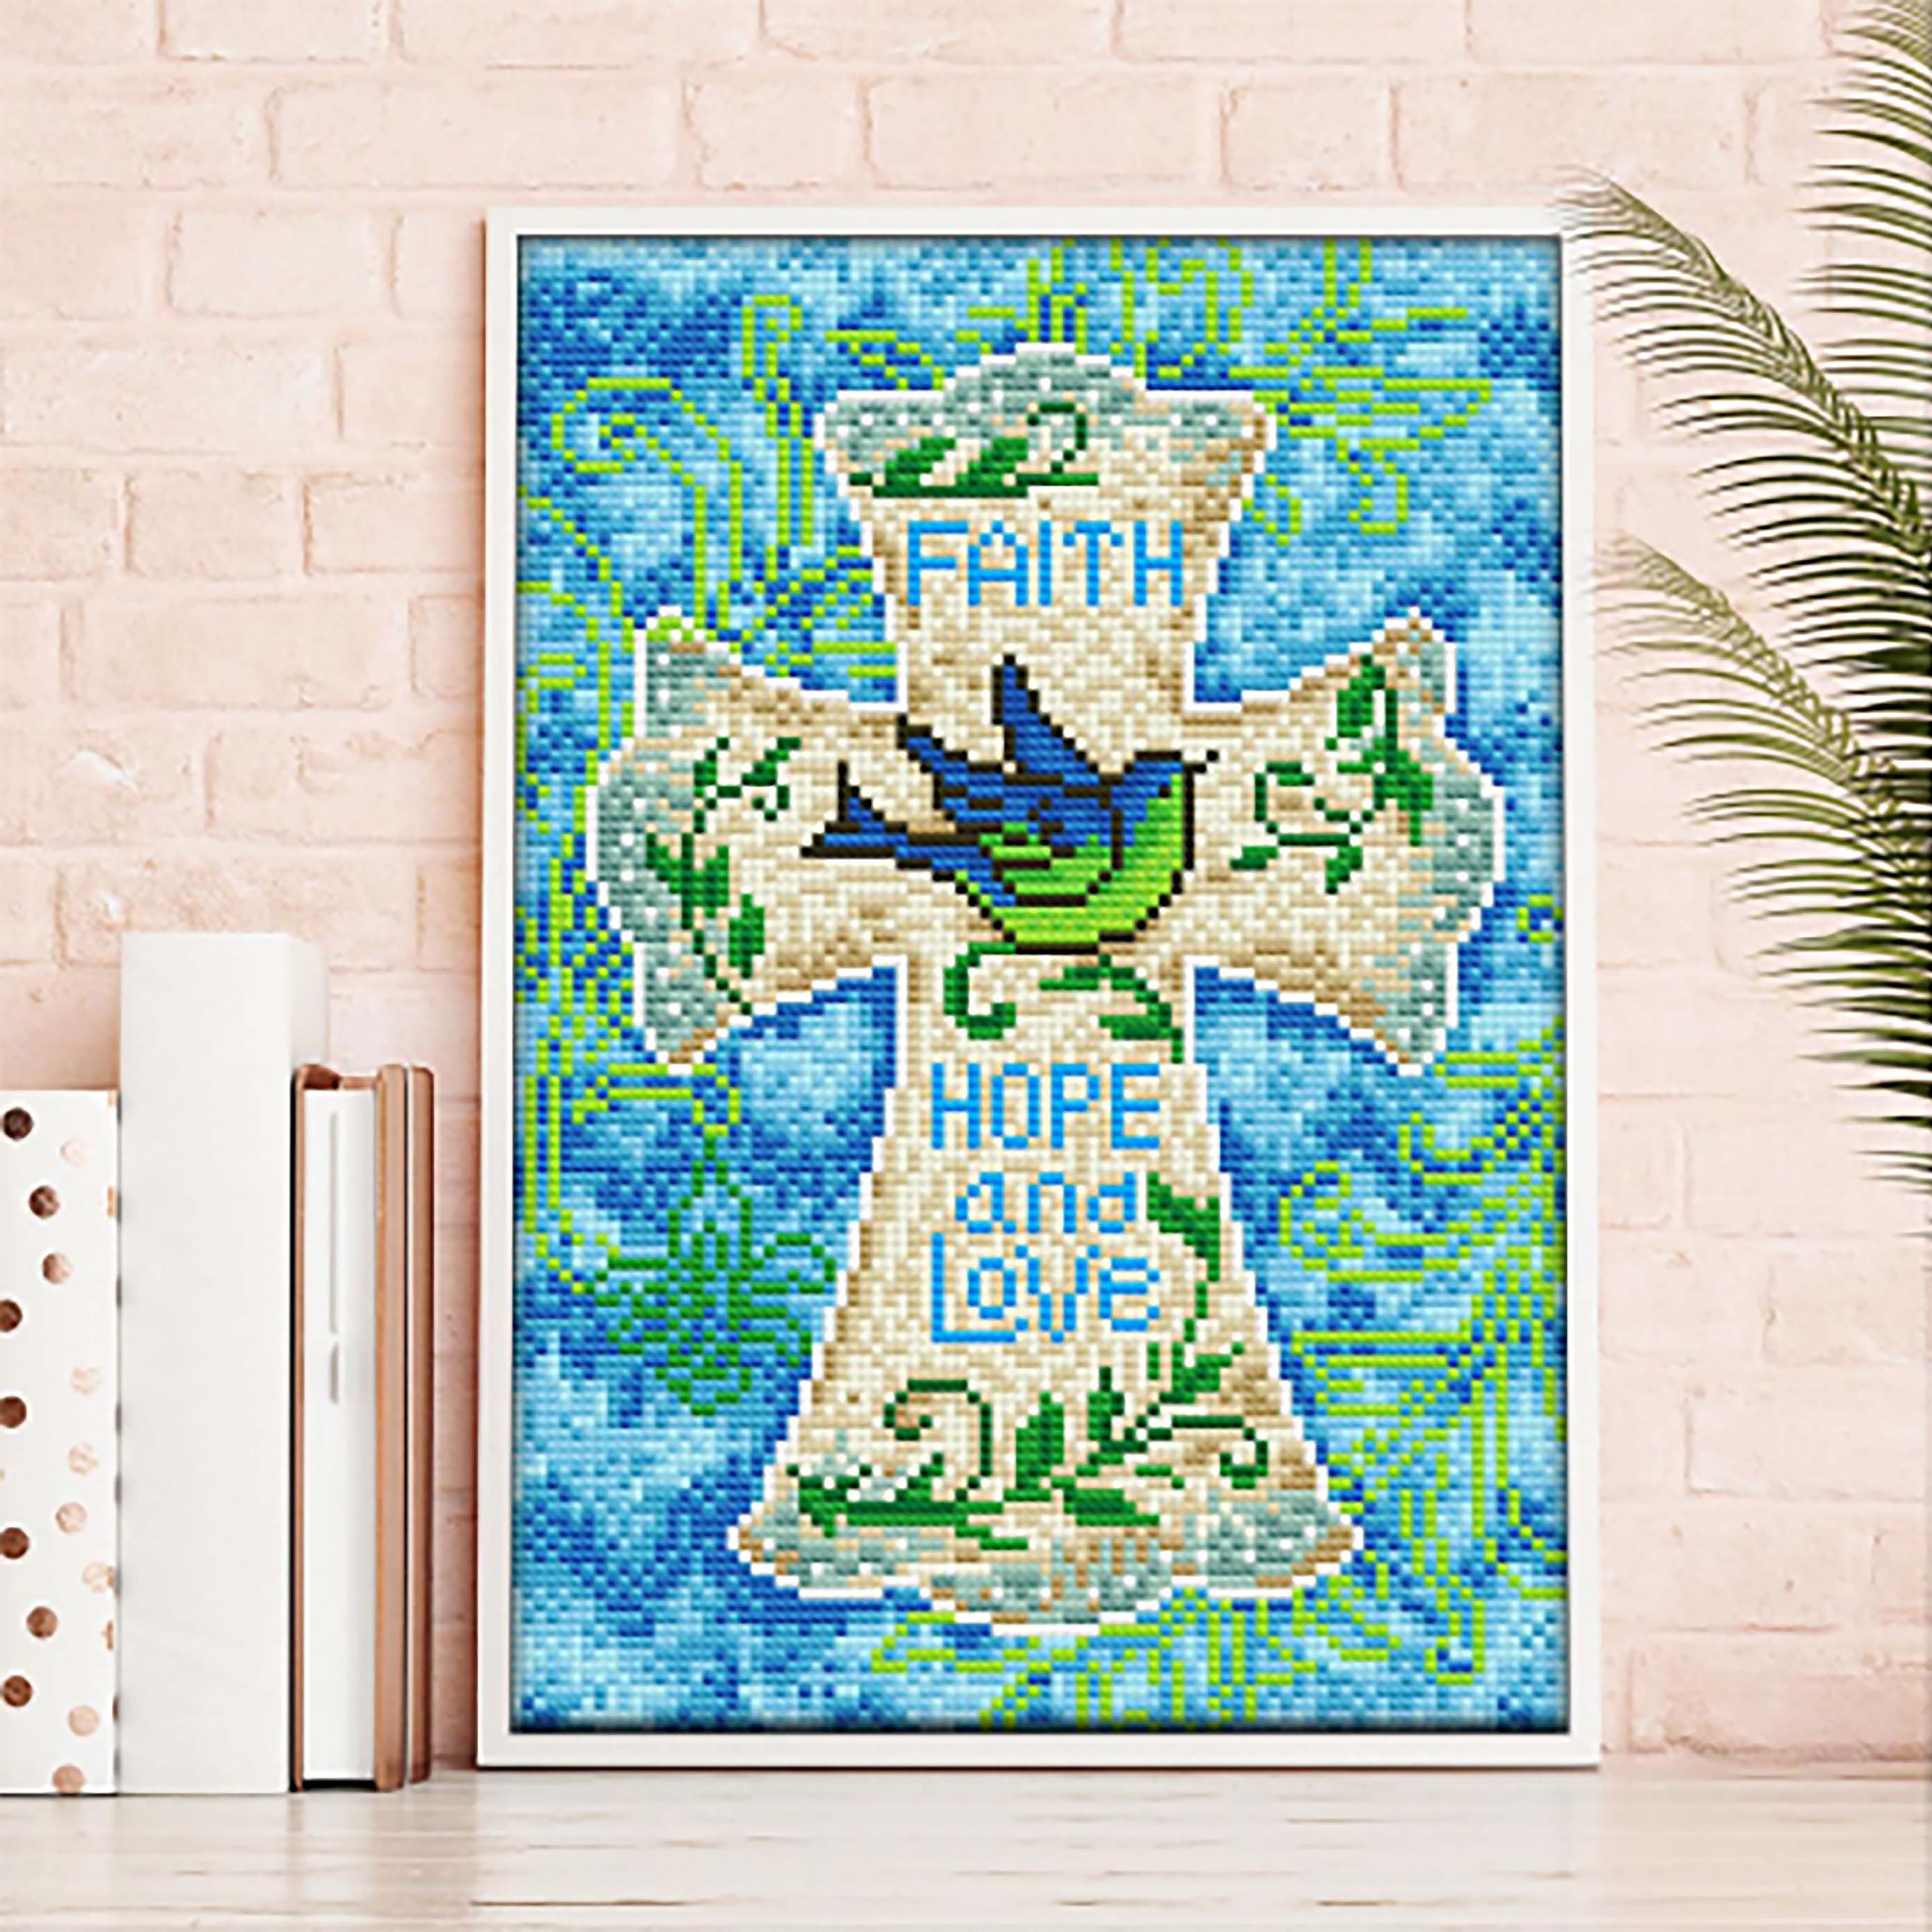 Sparkly Selections Faith, Hope and Love Glow in the Dark Diamond Art Kit